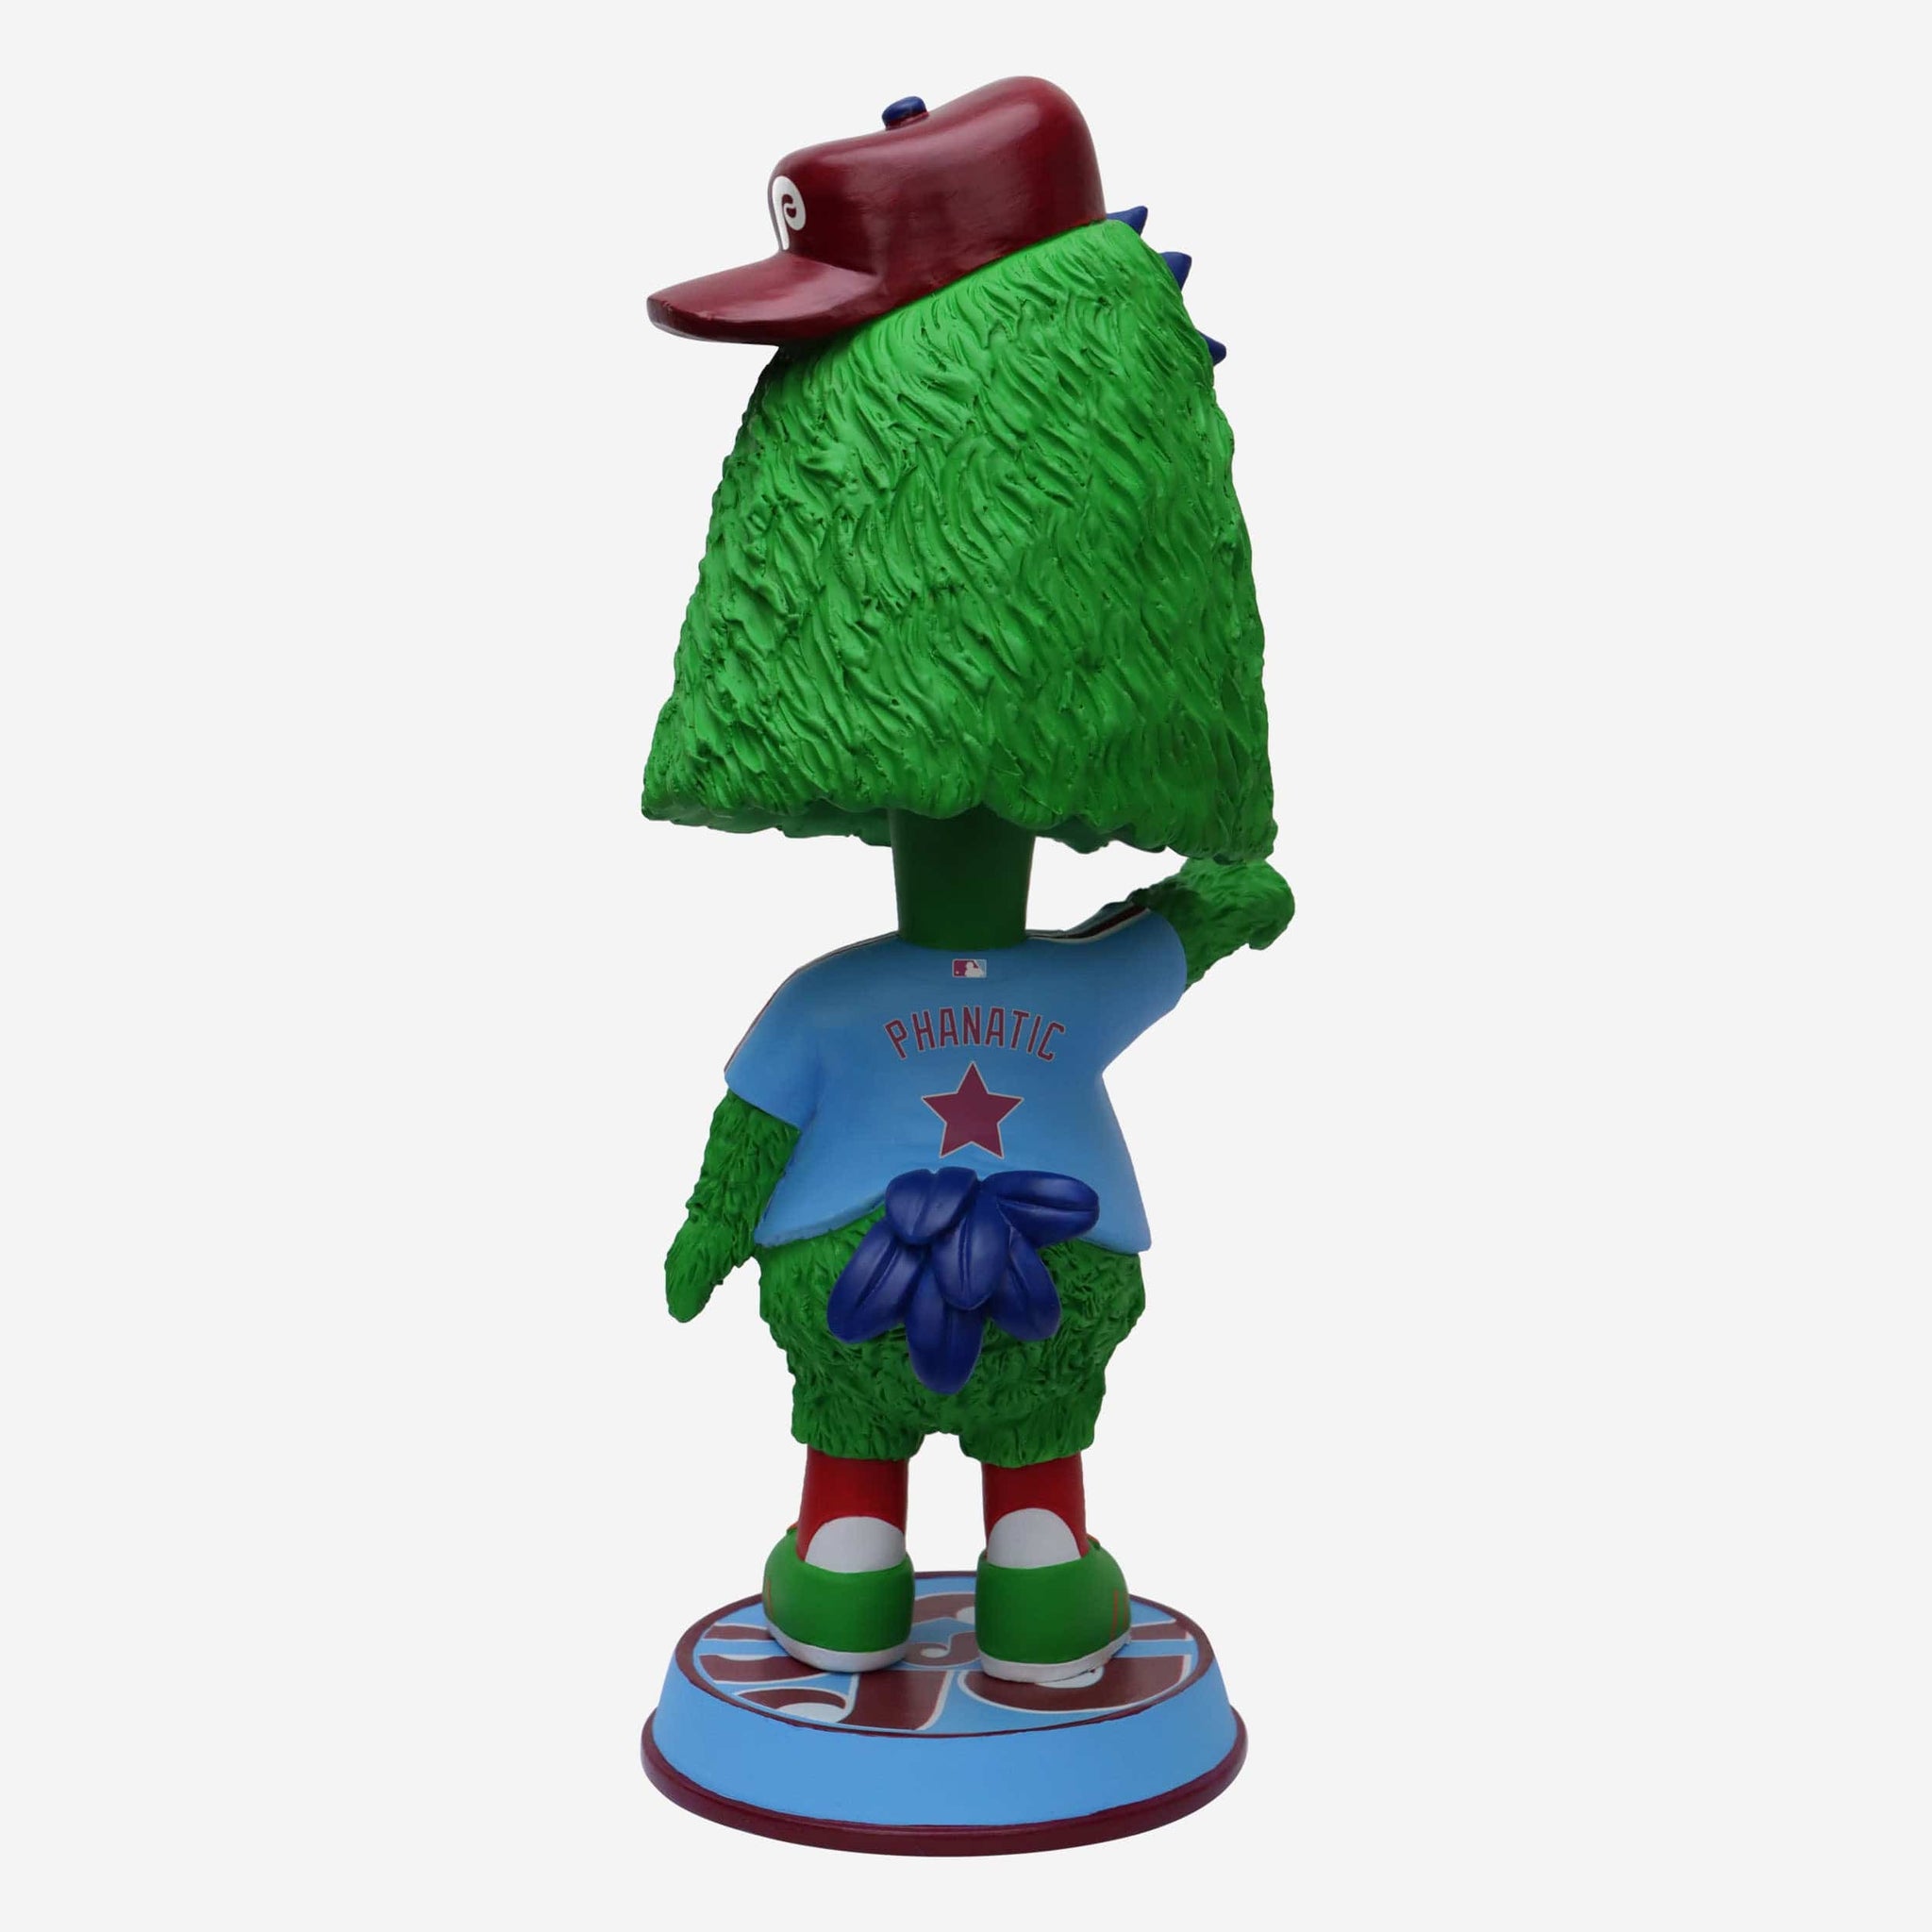 New FOCO USA Philadelphia Phillies Welcome to Red October Philly Phanatic  Bobble Released - Sports Illustrated Inside The Phillies